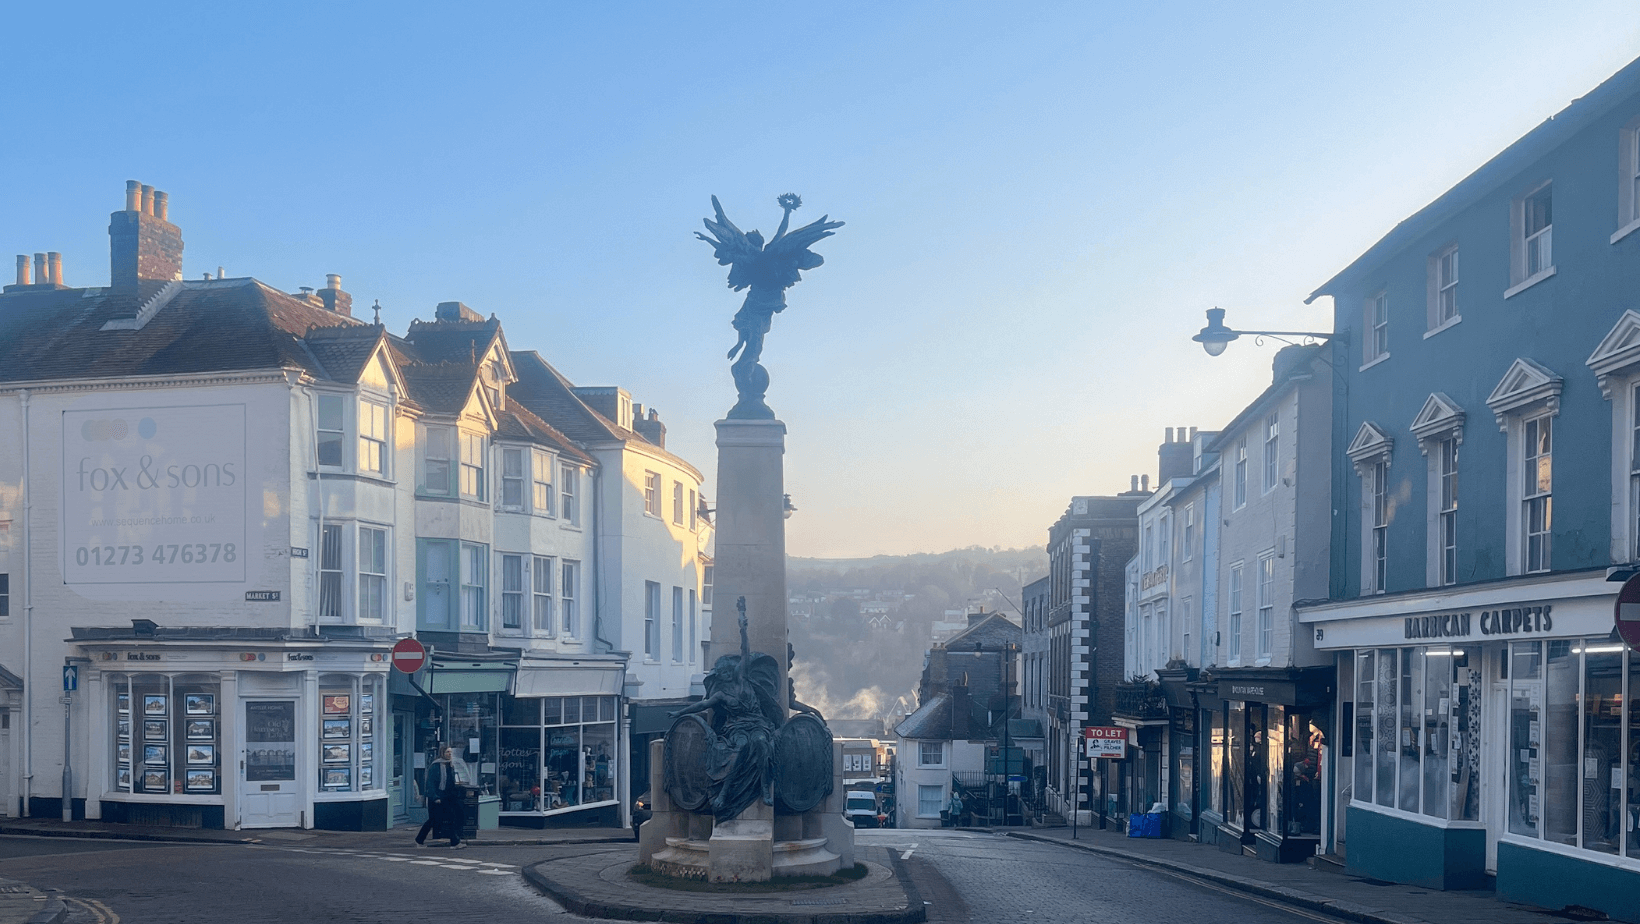 A view of School Hill in Lewes, East Sussex, with the War Memorial visible on a winter's day